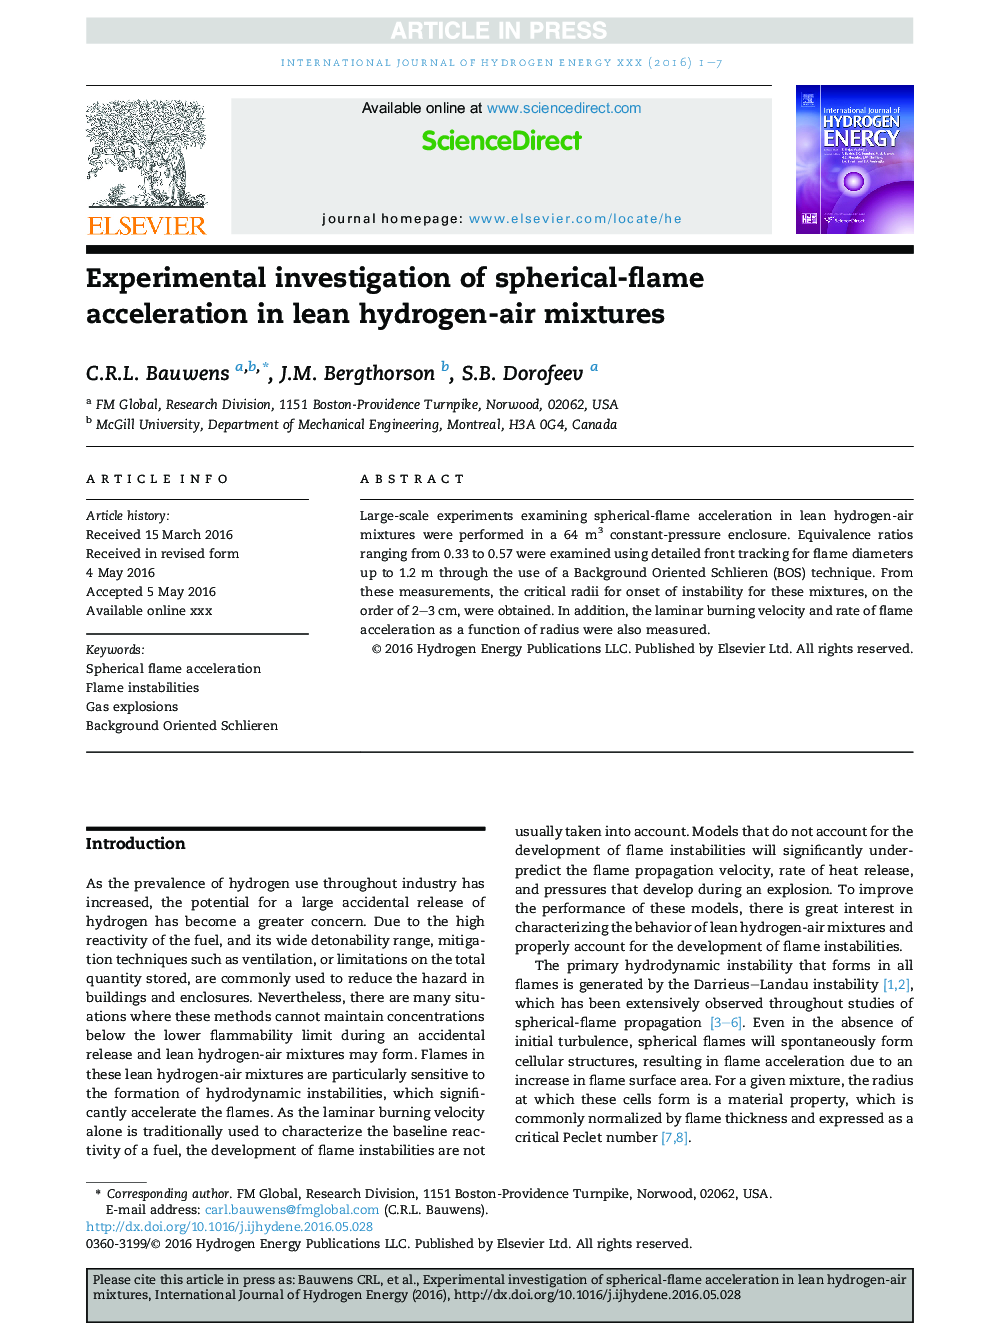 Experimental investigation of spherical-flame acceleration in lean hydrogen-air mixtures